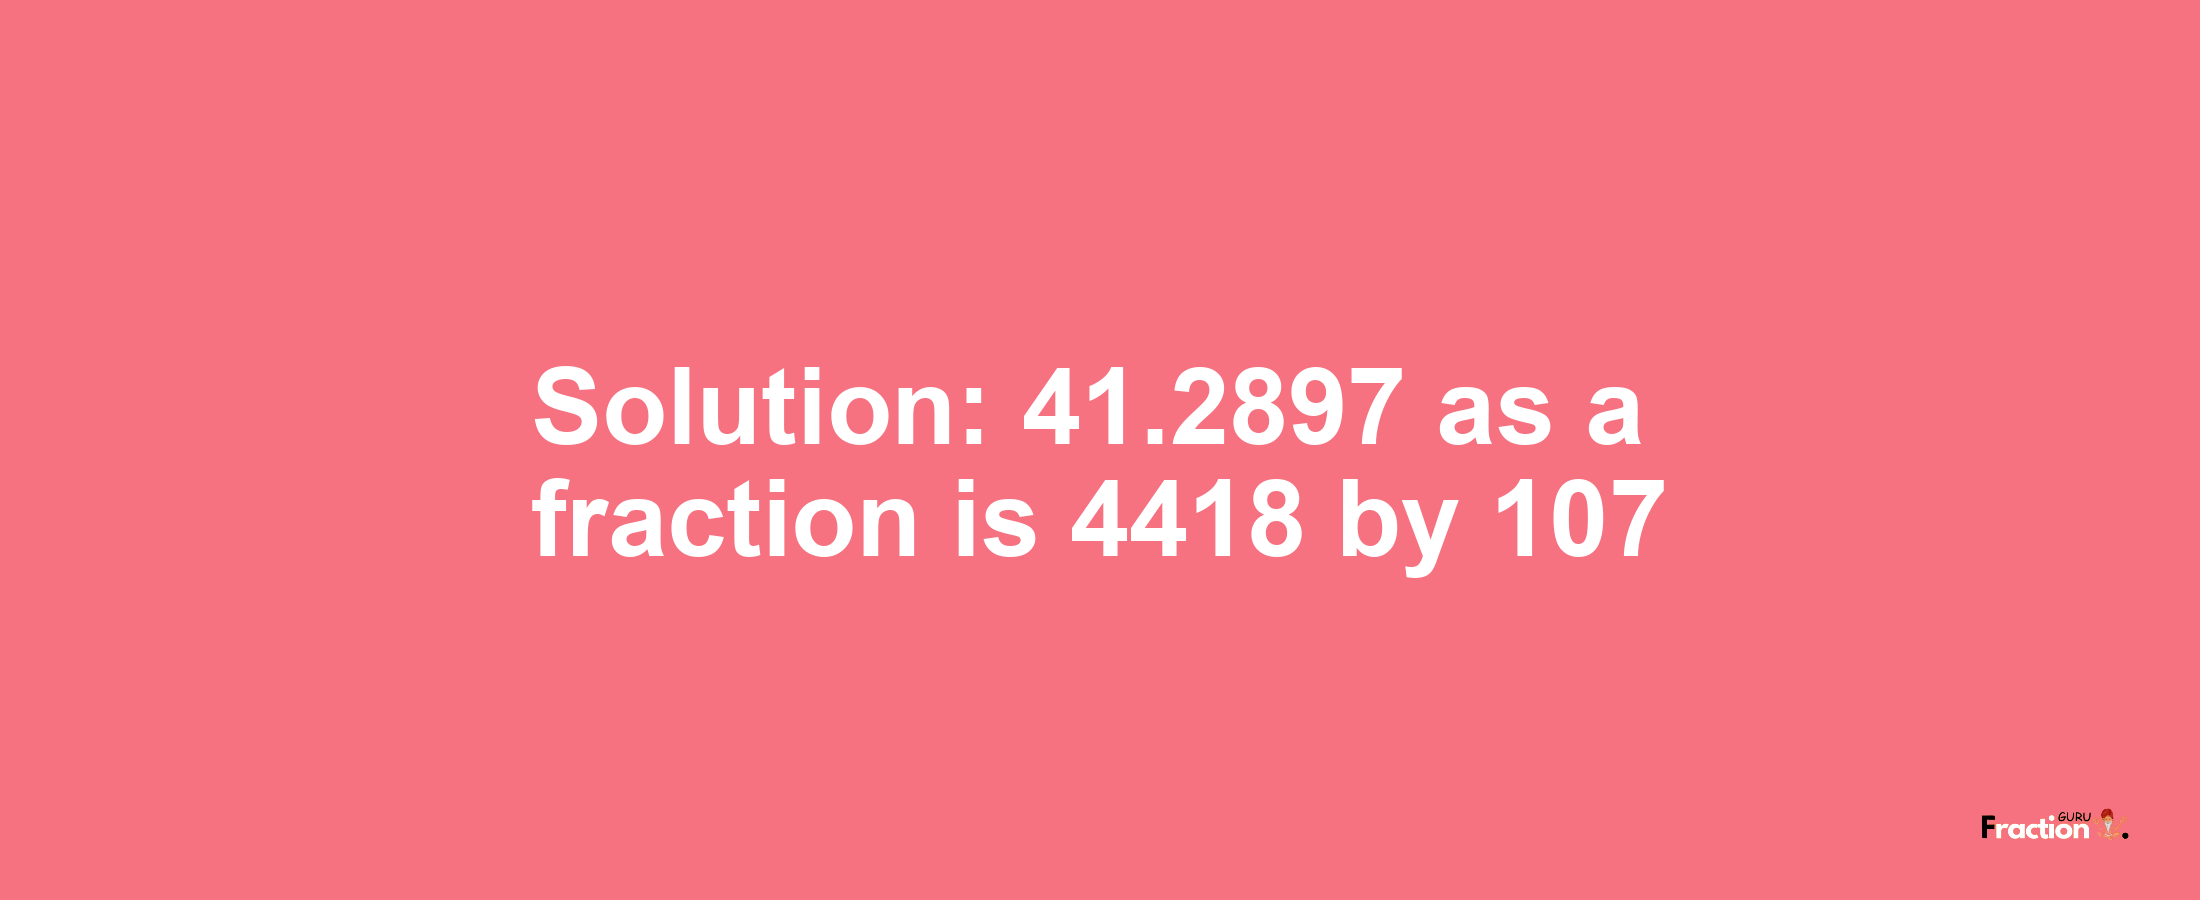 Solution:41.2897 as a fraction is 4418/107